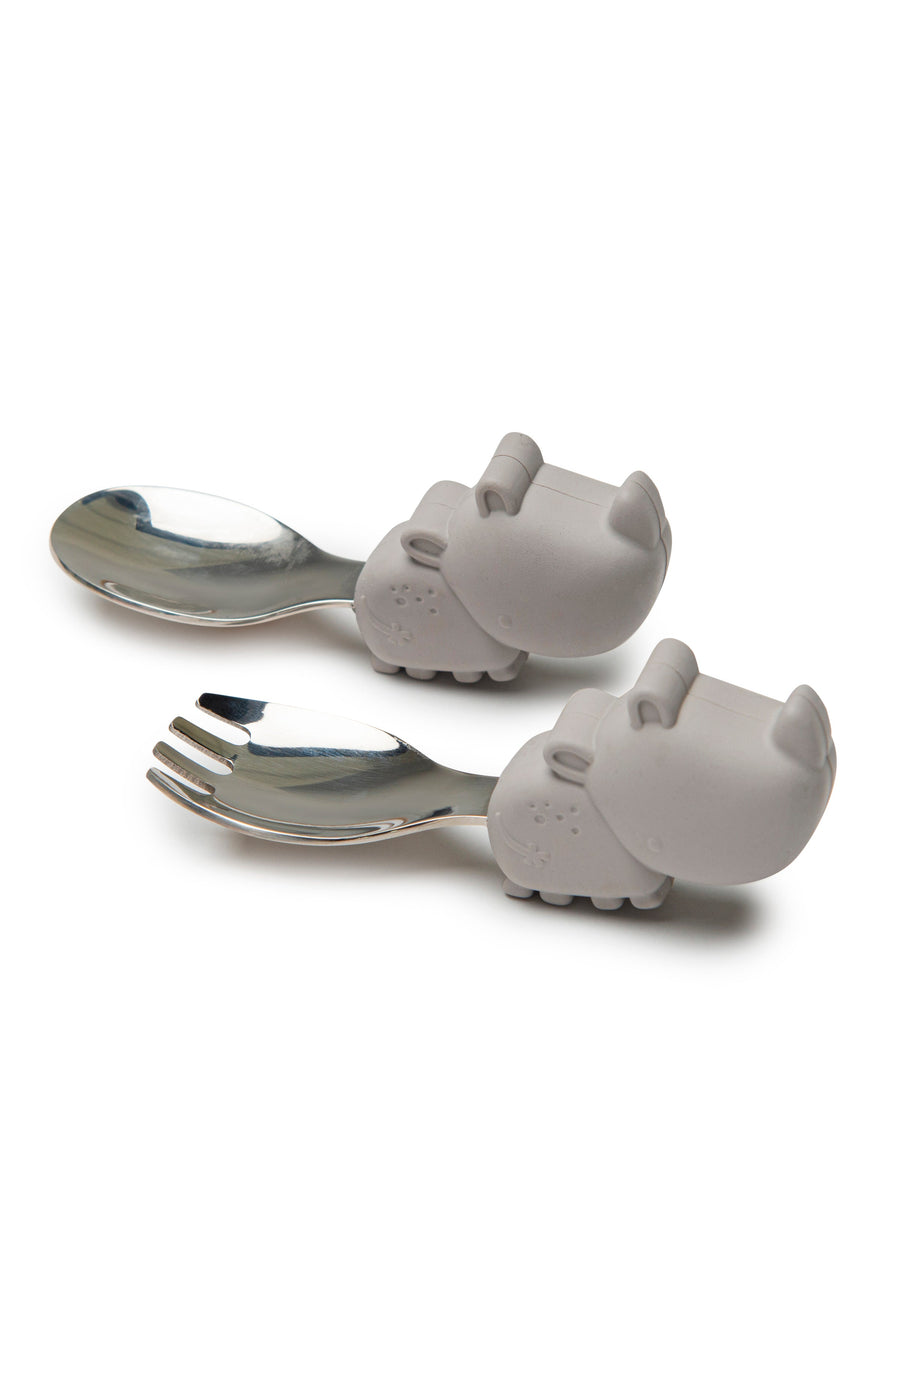 Born to be Wild Learning spoon/fork set Eat Loulou Lollipop Rhino 